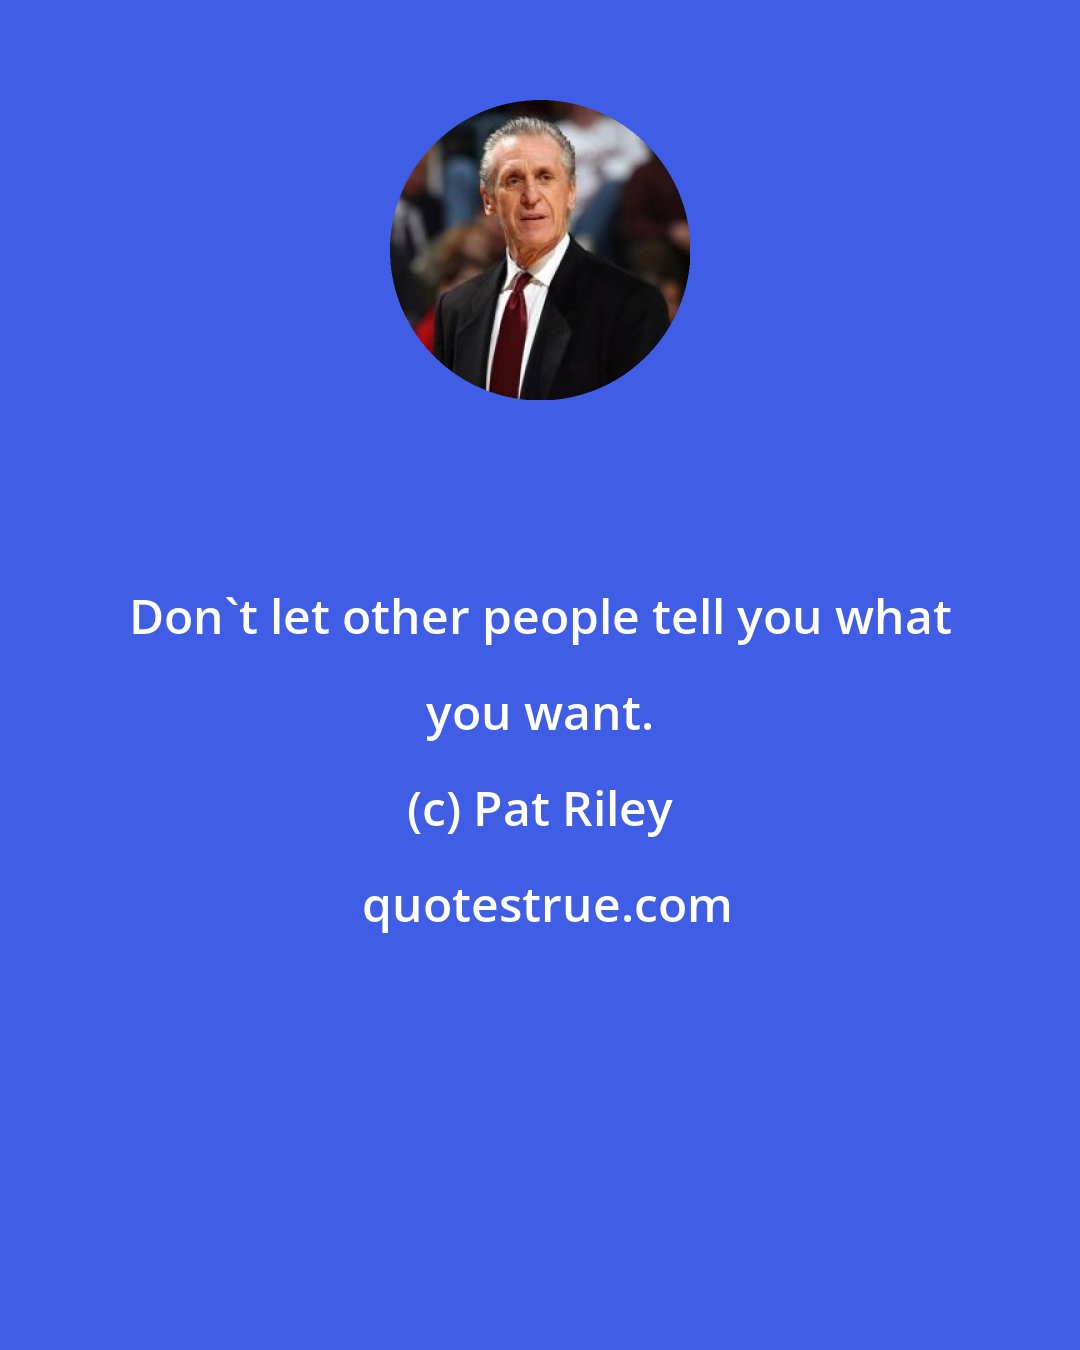 Pat Riley: Don't let other people tell you what you want.